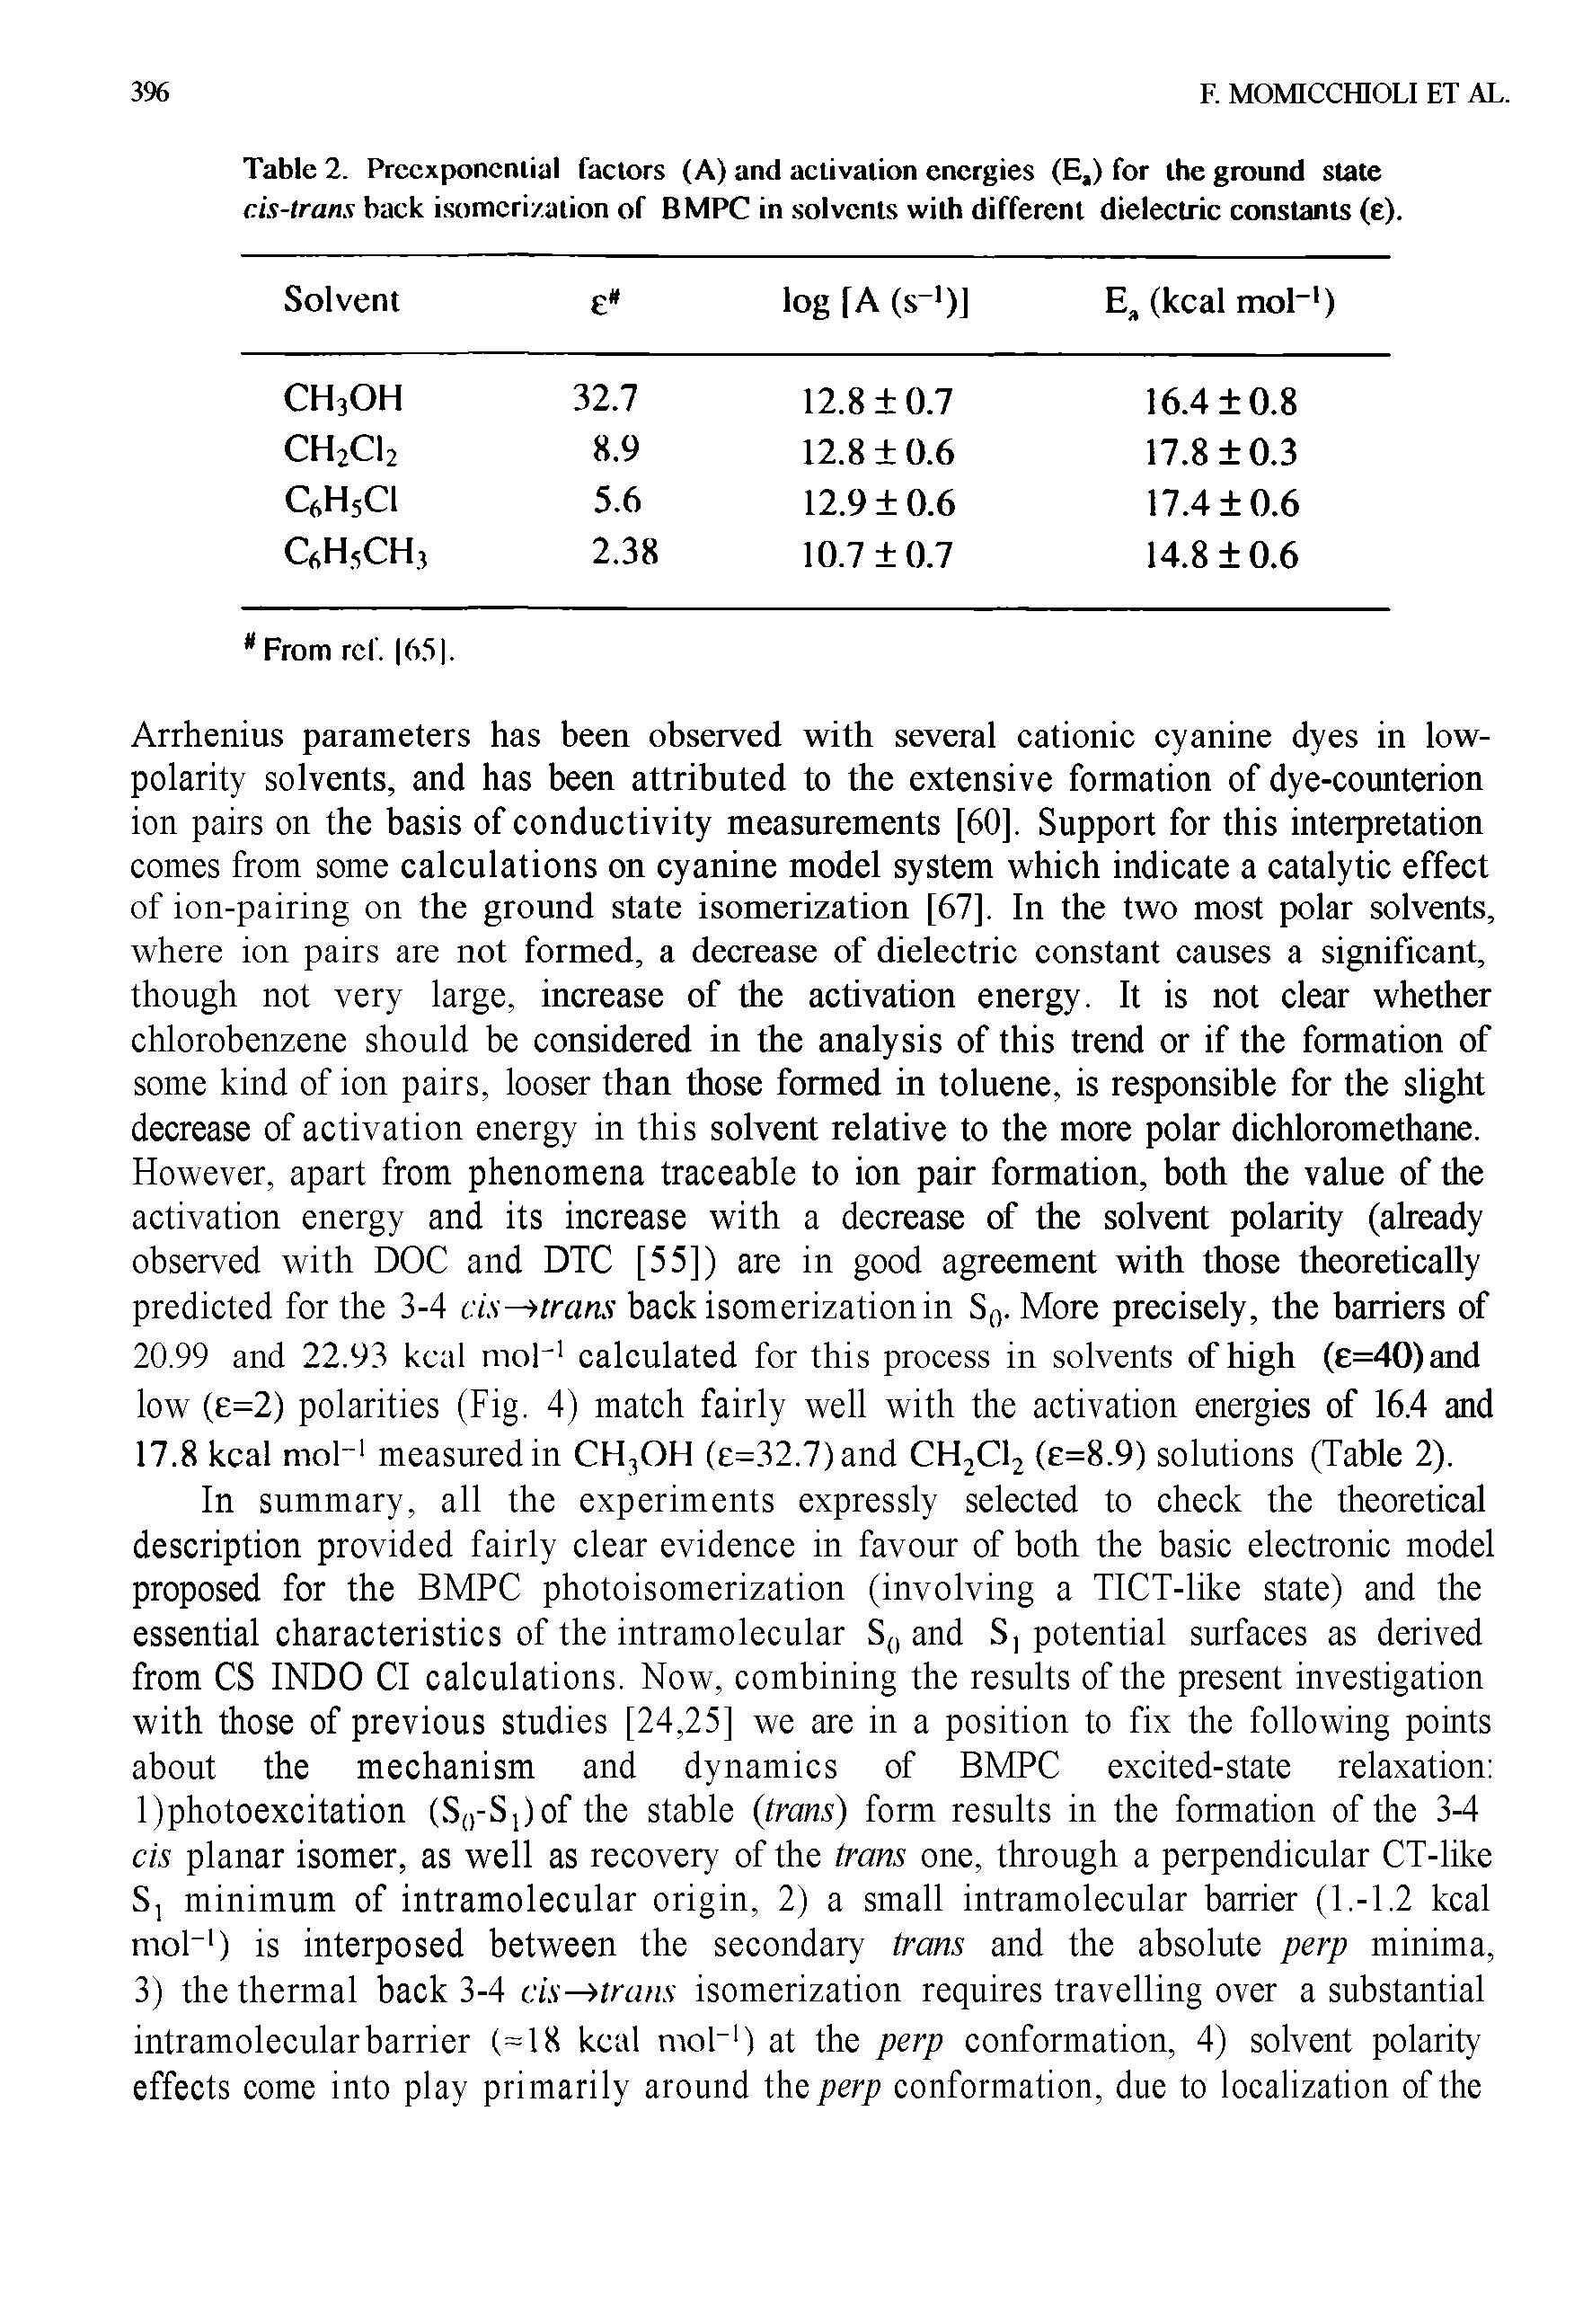 Table 2. Prccxponcnlial factors (A) and activation energies (E,) for the ground state cis-trans back isomerization of BMPC in solvents with different dielectric constants (e).